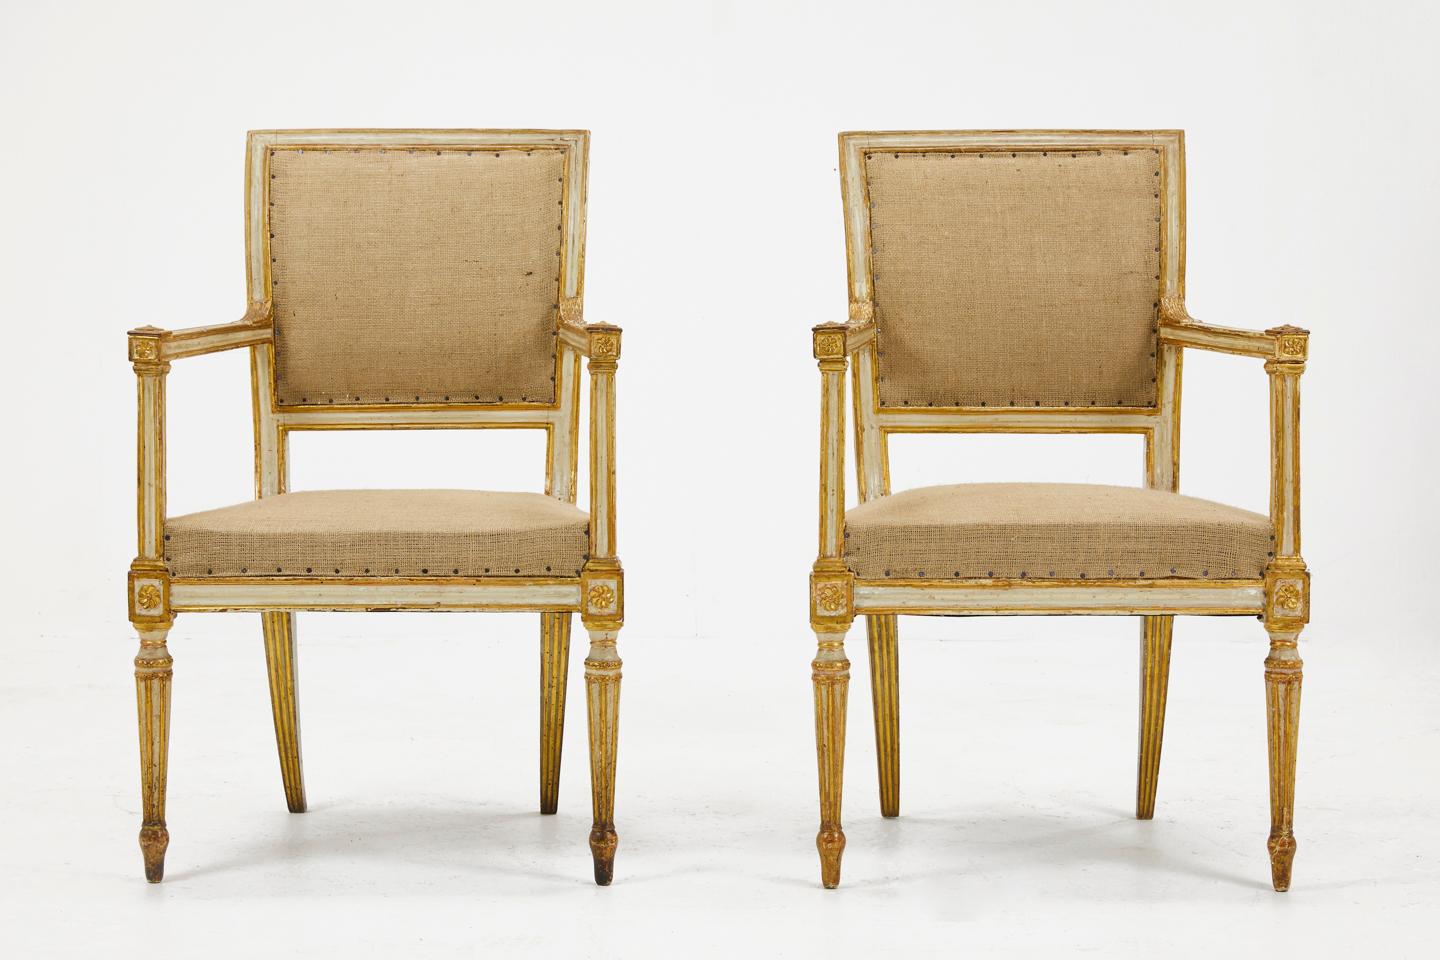 Pair of 18th century Italian armchairs with original cream paint and gilded decoration. Nice model with fabulous patina.

Upholstered in hessian, and fully prepared for recovering. 

Measures: Seat height 45.5cm
Seat depth 43cm.